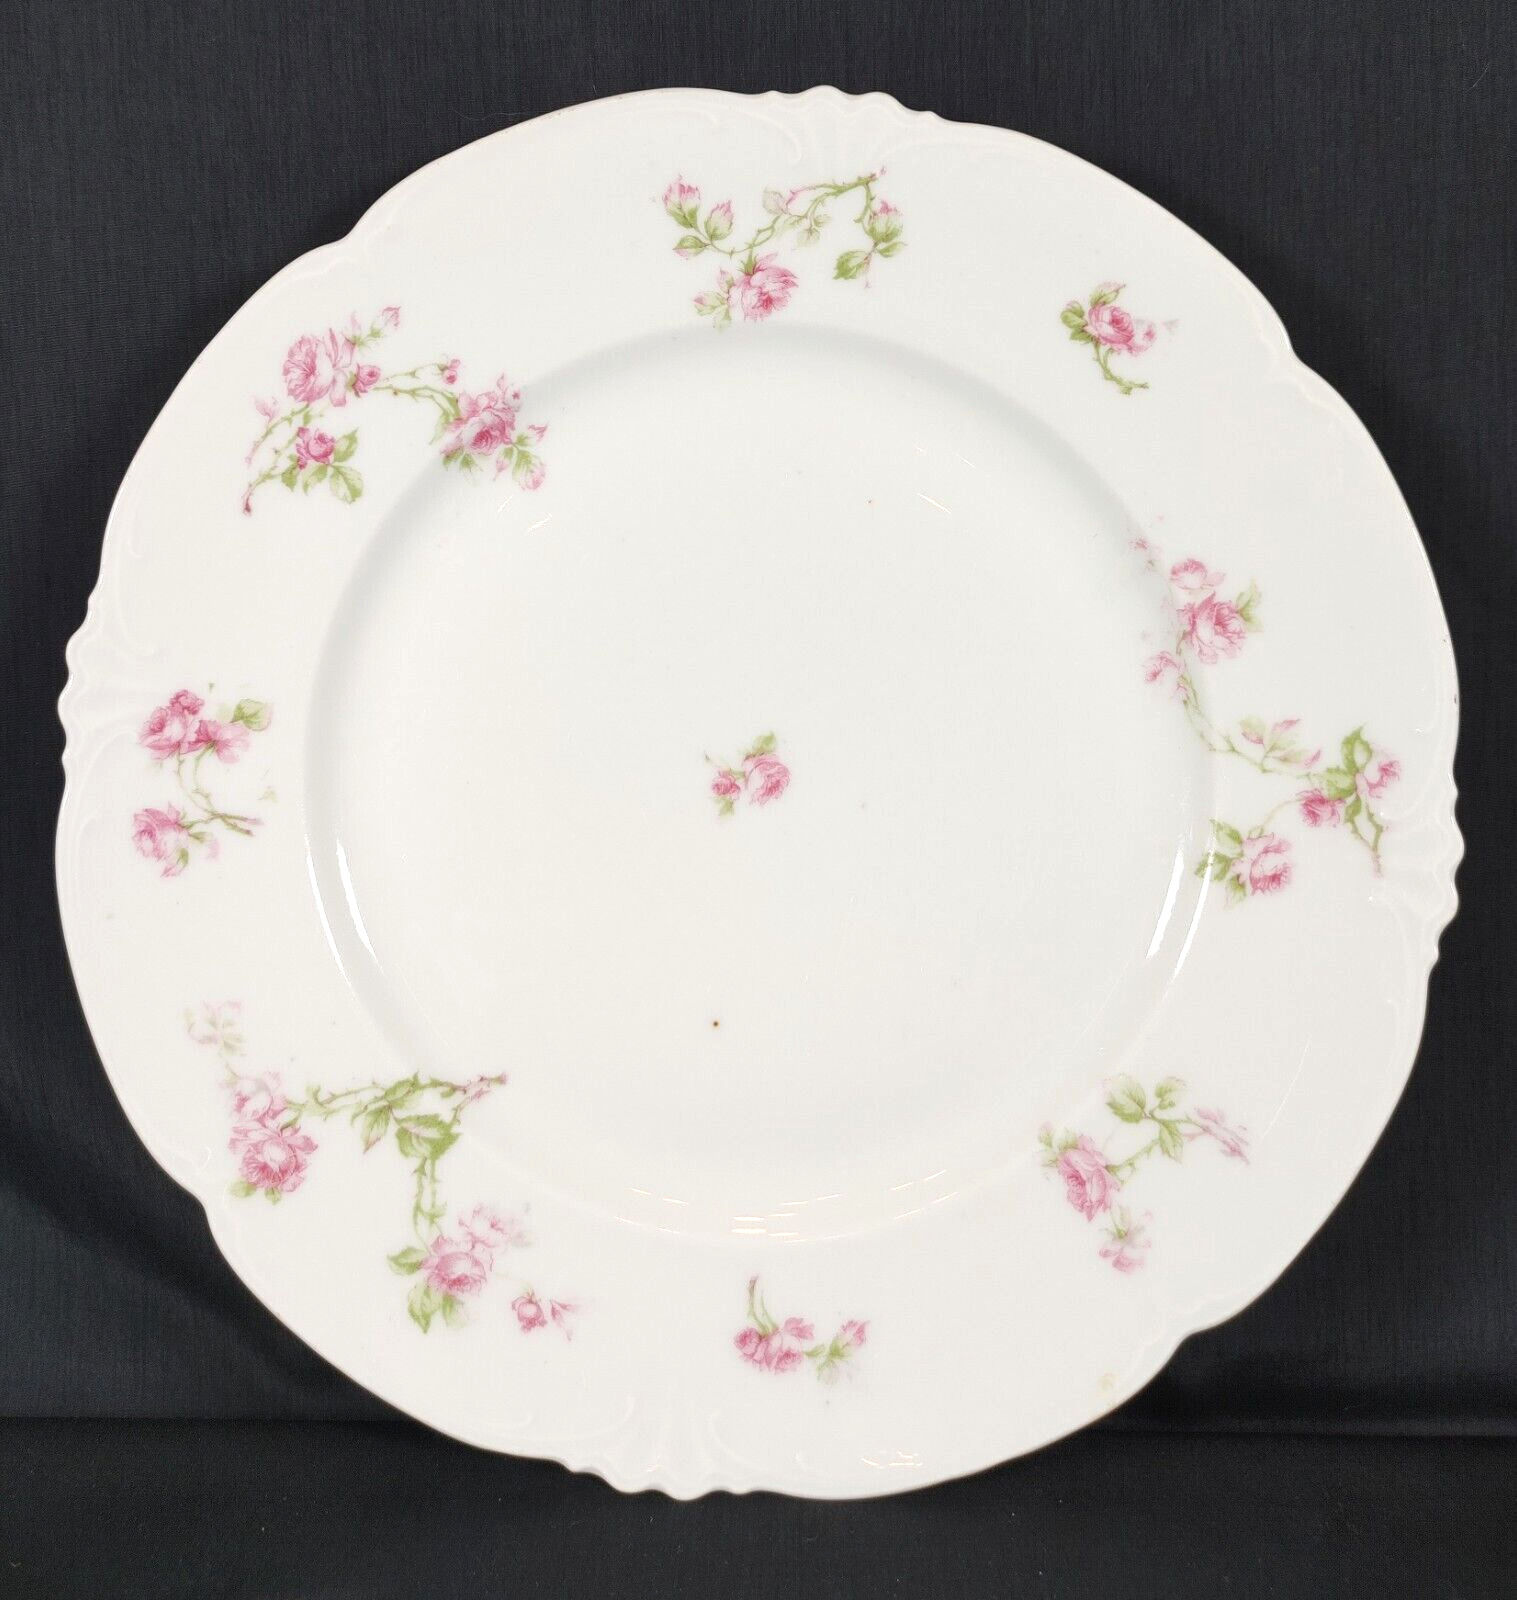 Habsburg China Austria Scalloped Rim Dinner Plate Decorated with Pink Roses